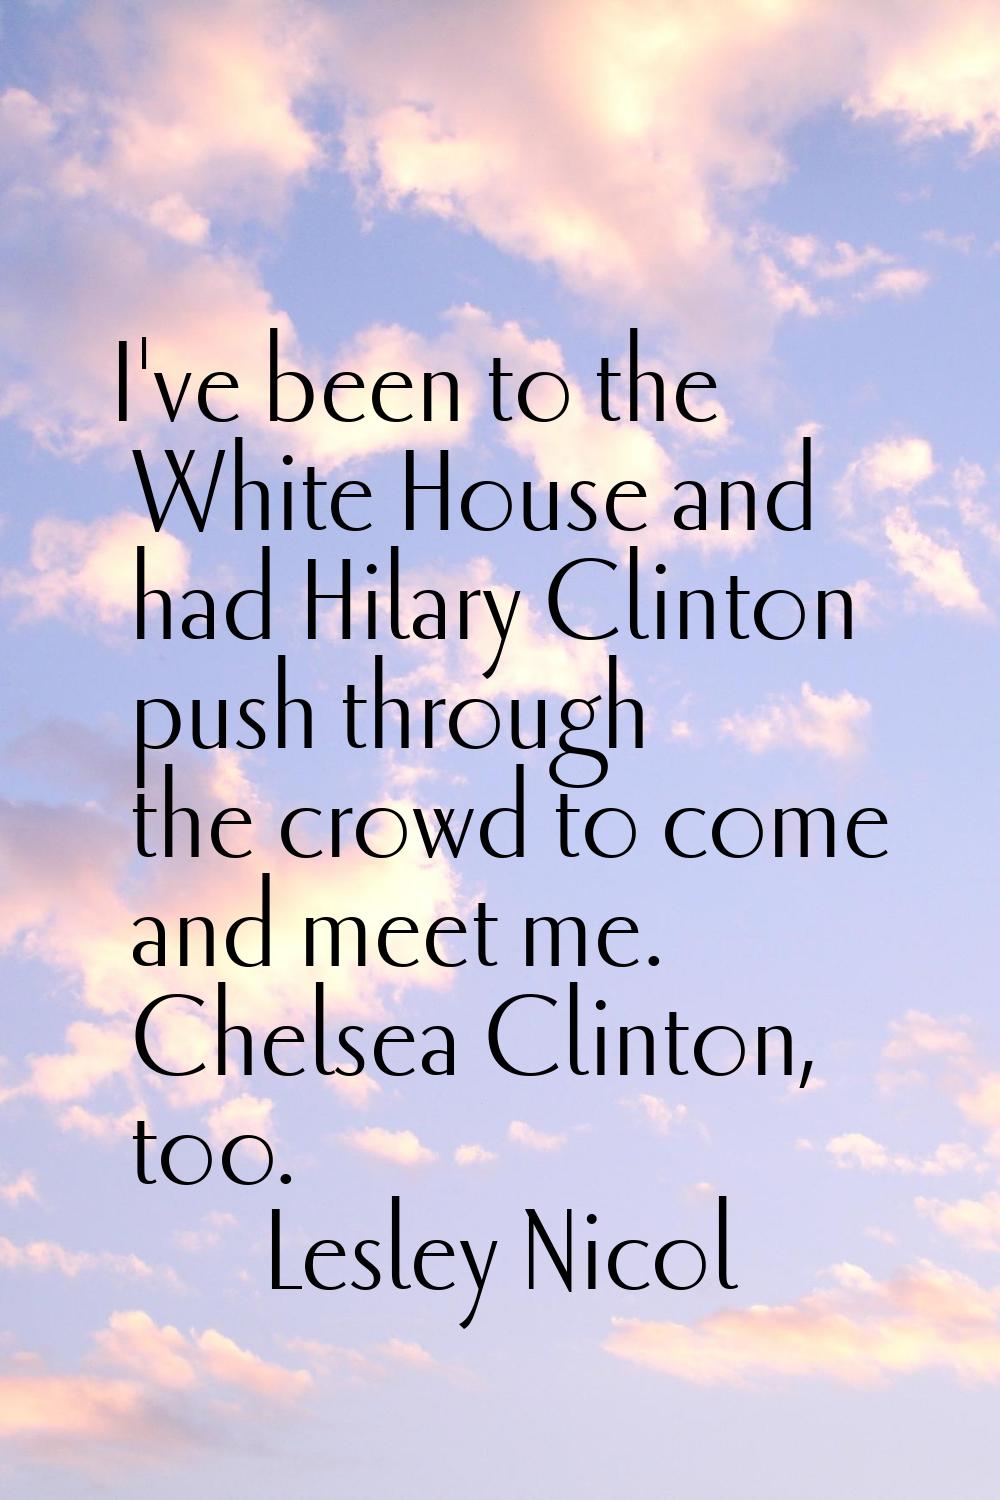 I've been to the White House and had Hilary Clinton push through the crowd to come and meet me. Che